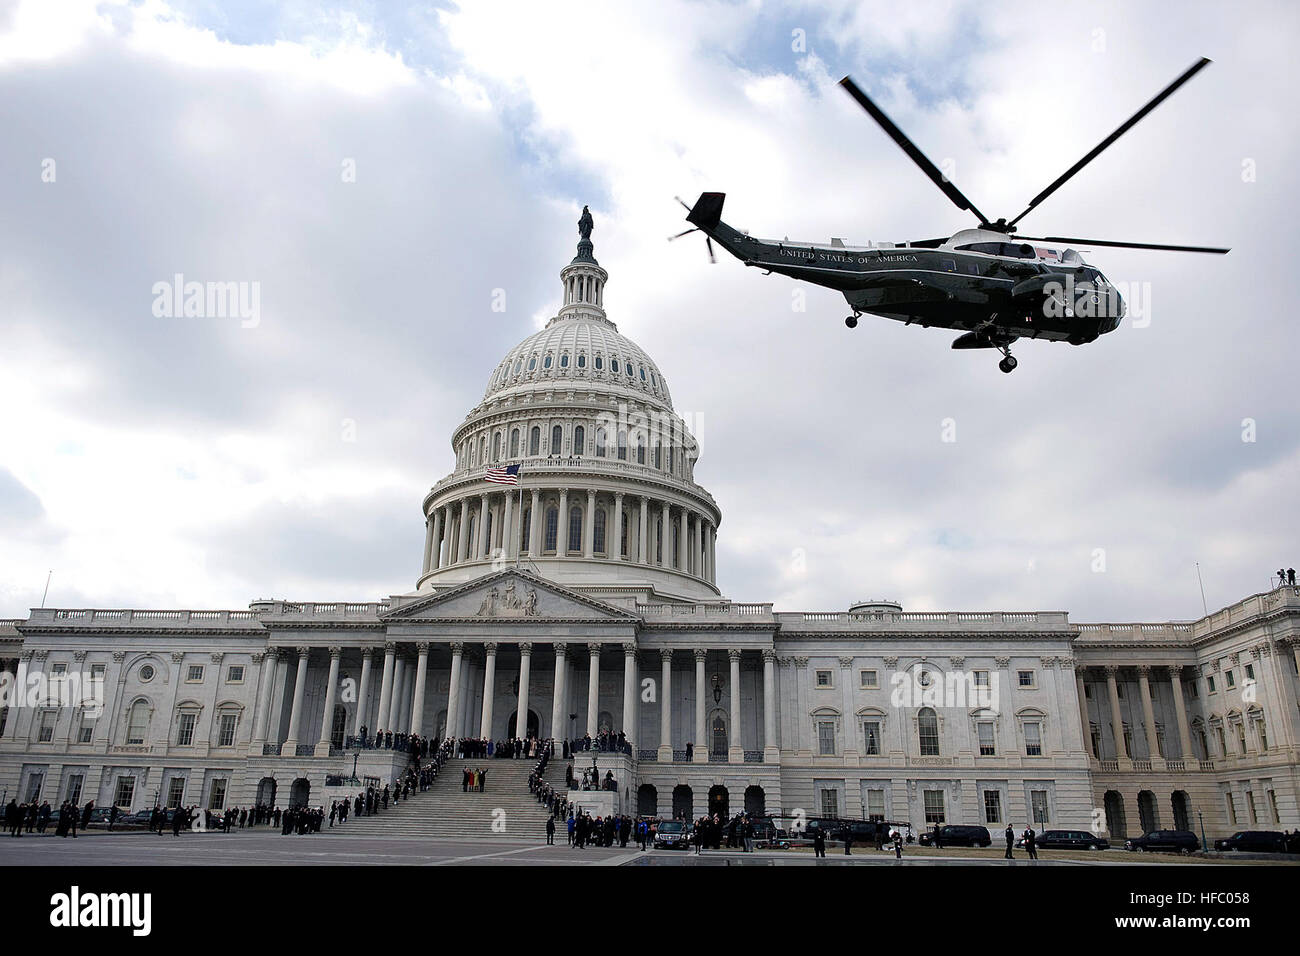 090120-N-0696M-103 The U.S. Marine Corps helicopter carrying 43rd President George W. Bush departs the U.S. Capital Building at the conclusion of inaugural ceremonies for 44th President Barack Obama, Washington, D.C., Jan. 20, 2009 (DoD photo by Mass Communication Specialist 1st Class Chad J. McNeeley/Released) George W. Bush departs US Capitol 1-20-09 hires 090120-N-0696M-103a Stock Photo